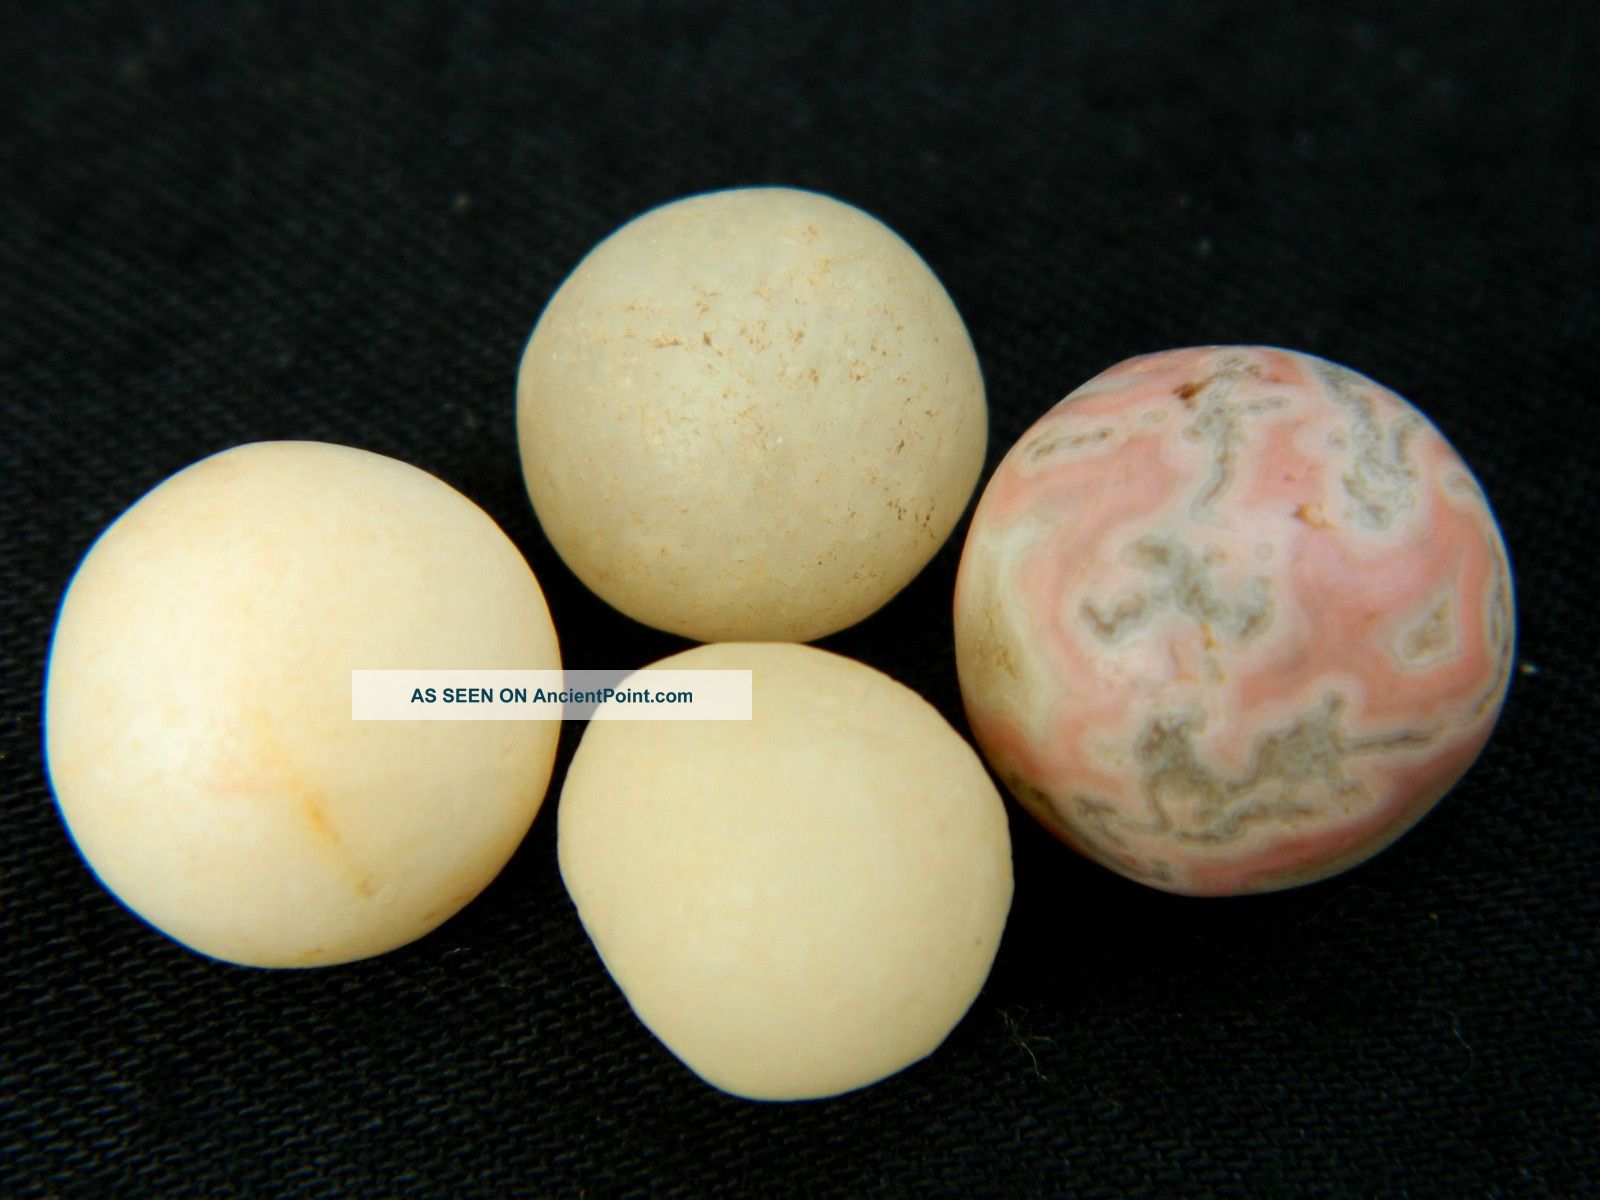 4 Neolithic Neolithique Stone Funeral Balls - 6500 To 2000 Before Present - Sahara Neolithic & Paleolithic photo